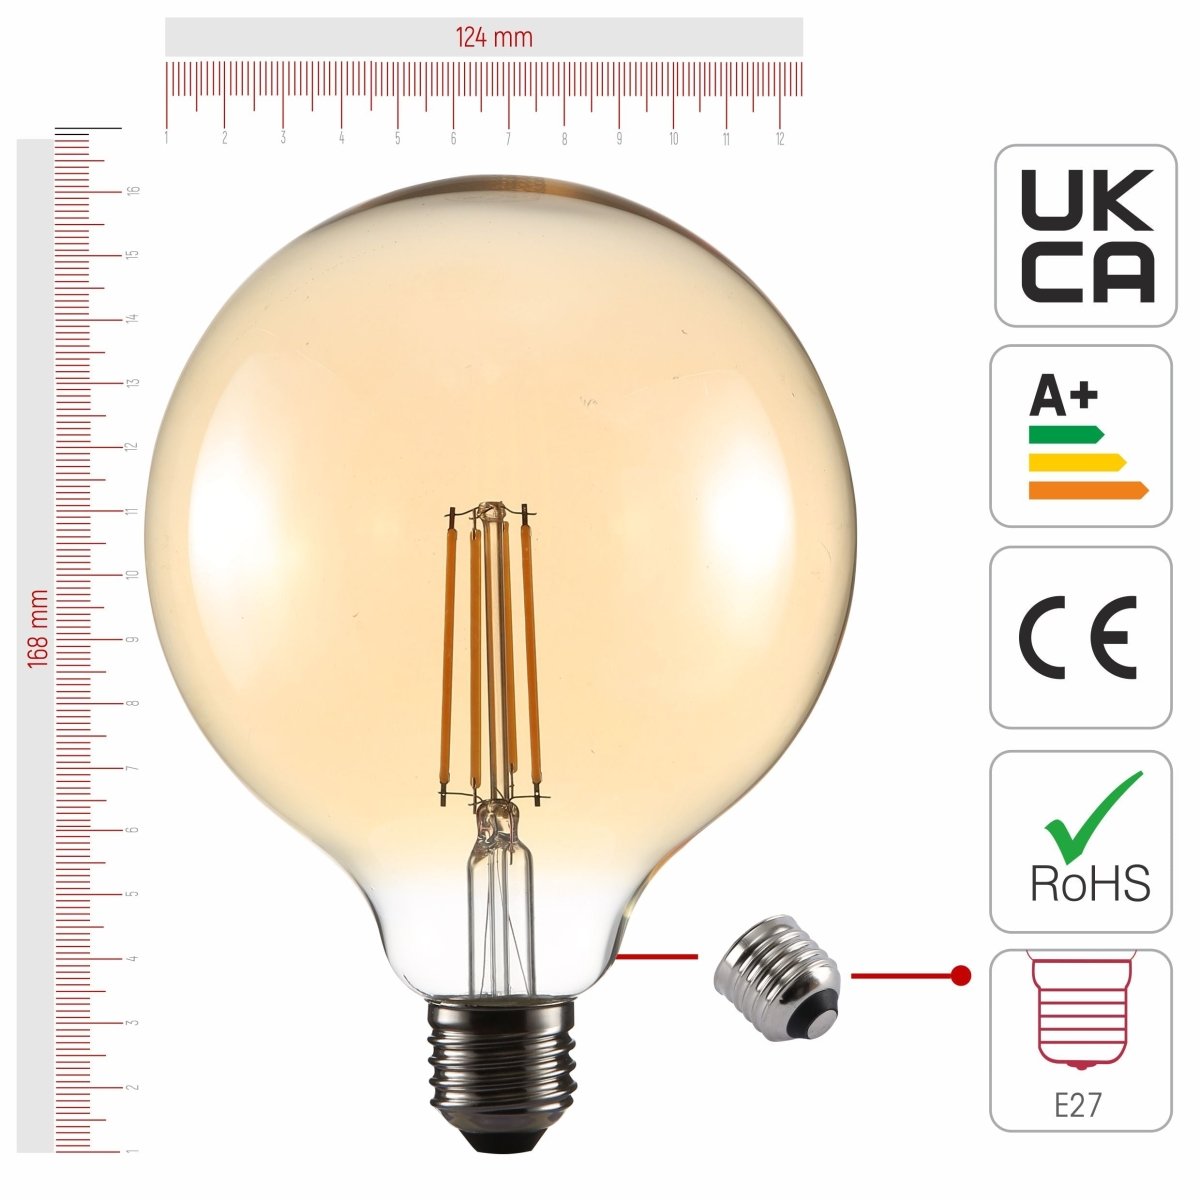 Size and certifications of LED Filament Bulb G125 Globe E27 Edison Screw 6.5W 680lm Warm White 2400K Amber